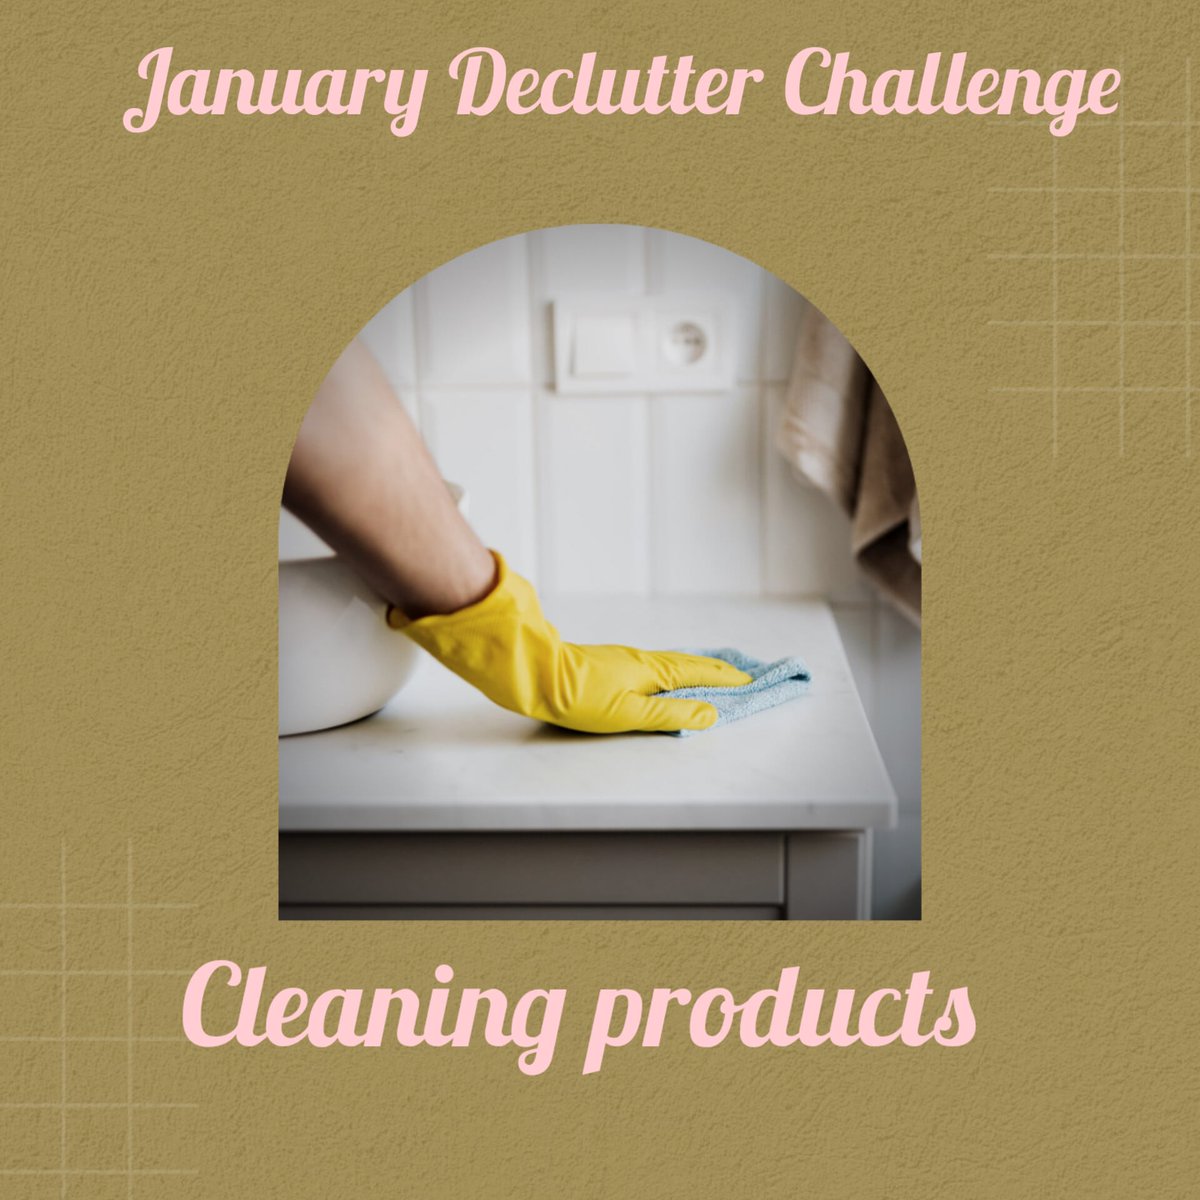 January Declutter Challenge!
Week 3 Kitchen 
Day  18 Cleaning products 

harmonizedlivinguk.co.uk @apdouk
#January #declutterchallenge #kitchen #cleaning #cleaningproducts